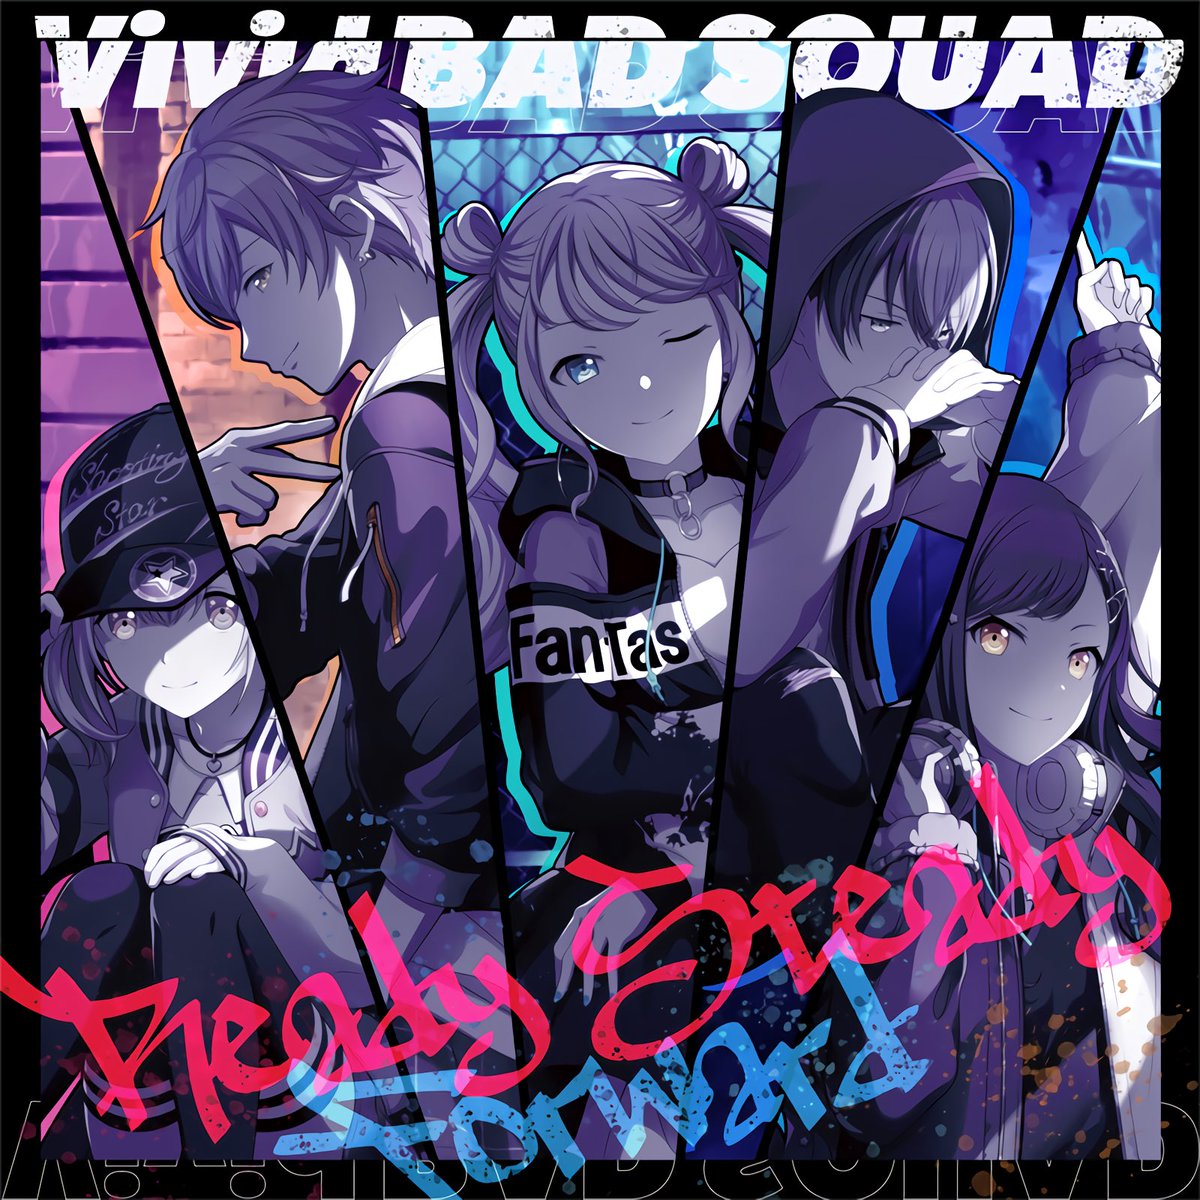 Cover art for『Vivid BAD SQUAD - Ready Steady feat. Hatsune Miku (Prod. Giga)』from the release『Ready Steady/Forward』